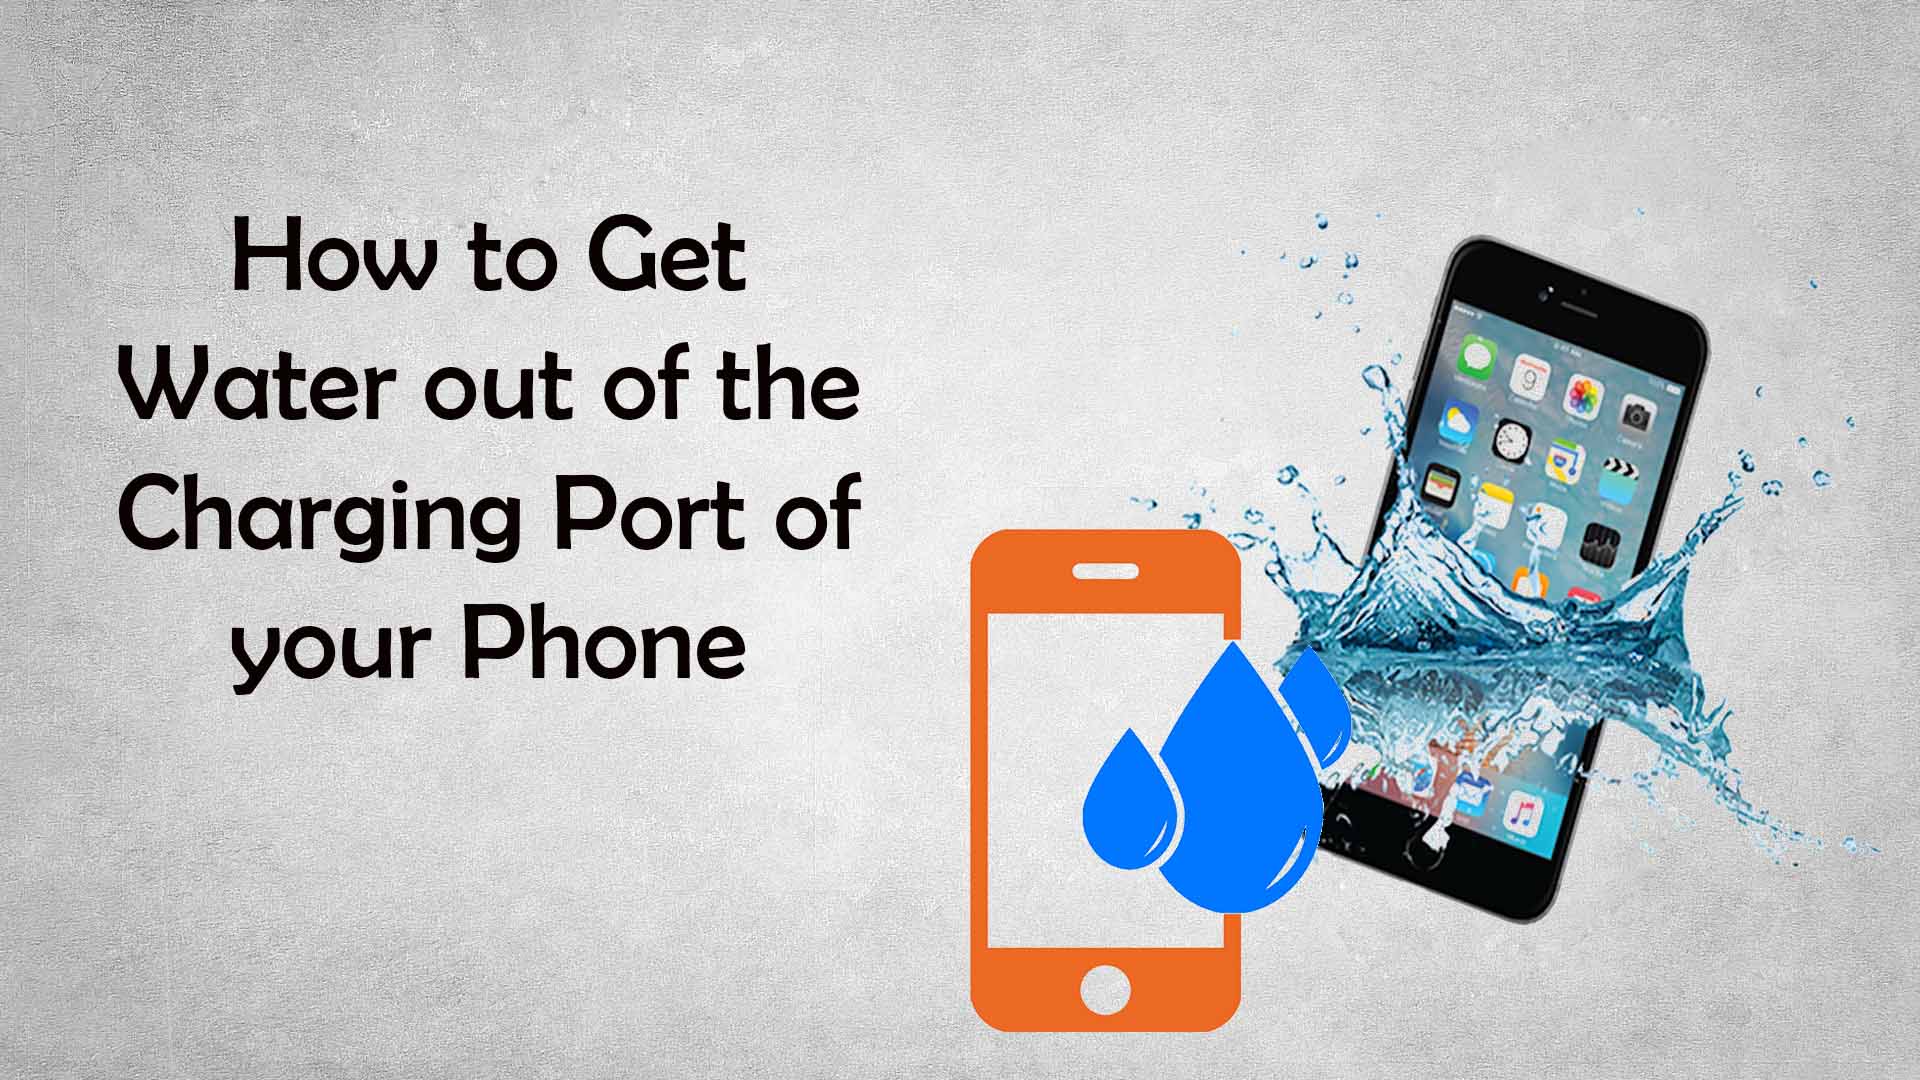 How to get Water Out of Charging Port of your Phone